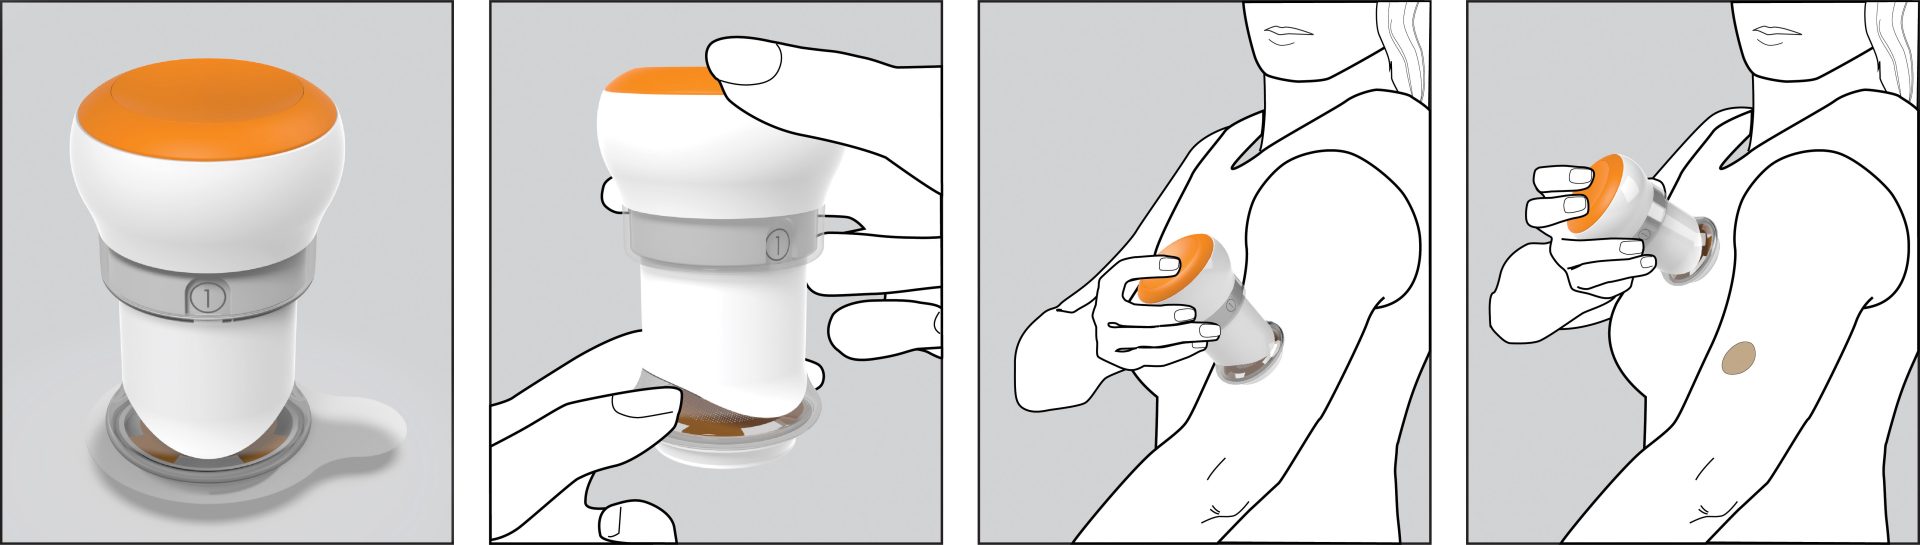 A four-panel illustration showing the steps for using a handheld transdermal patch applicator: from resting position, opening, applying on skin, to pressing the dispenser button.